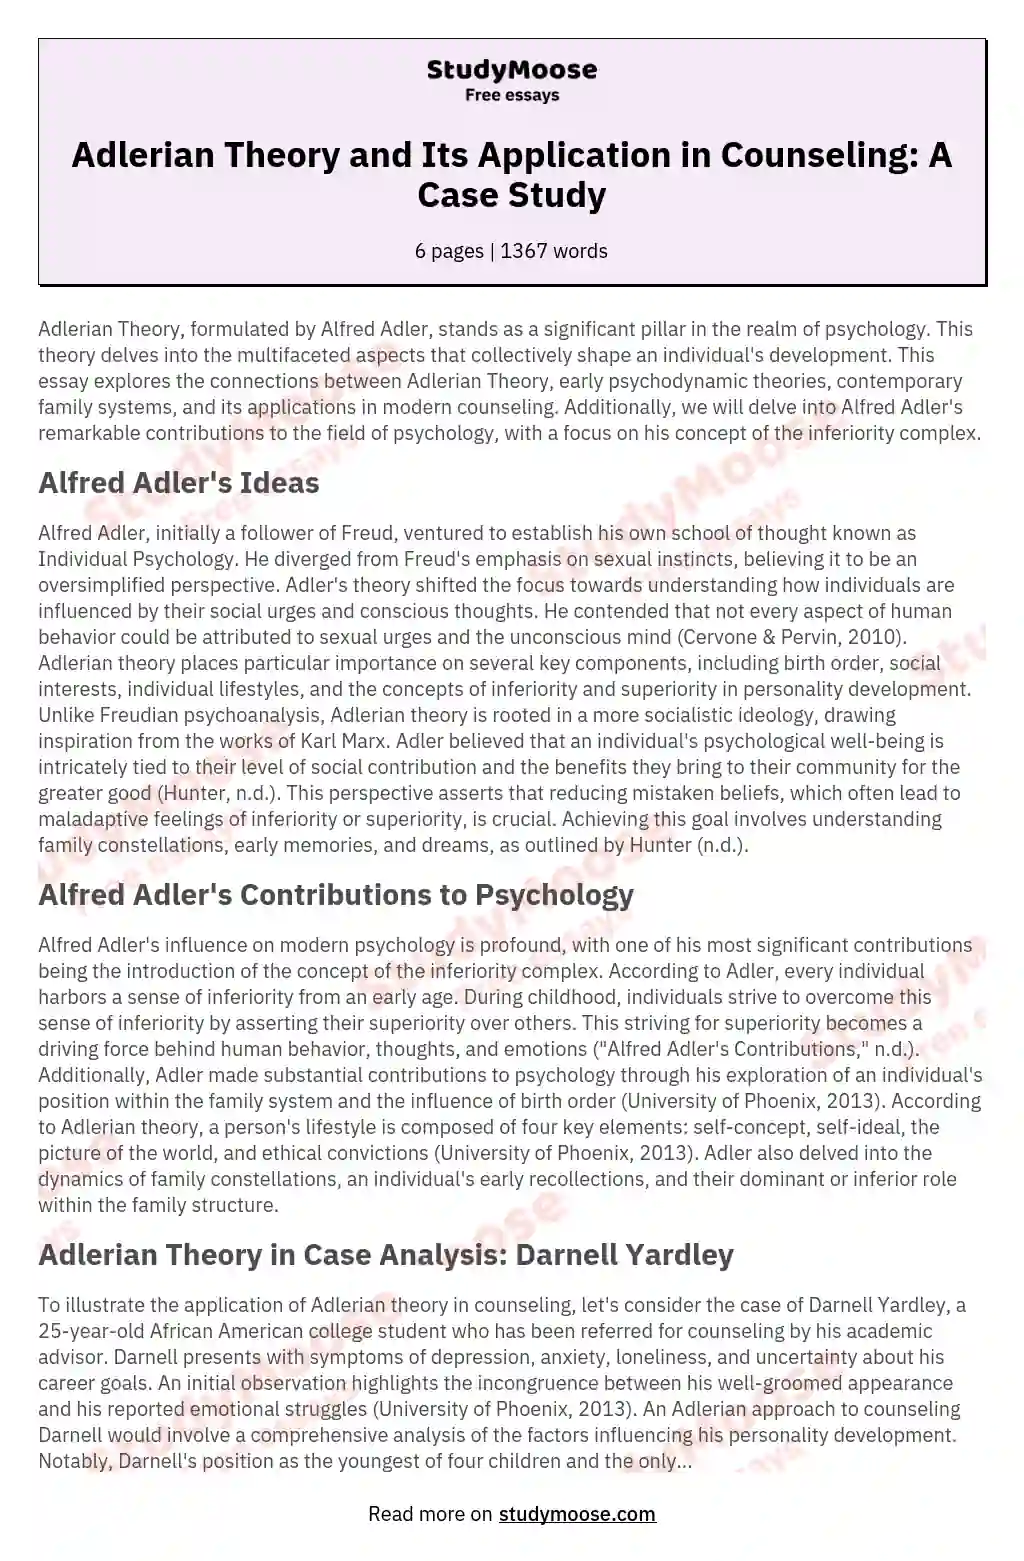 Adlerian Theory and Its Application in Counseling: A Case Study essay